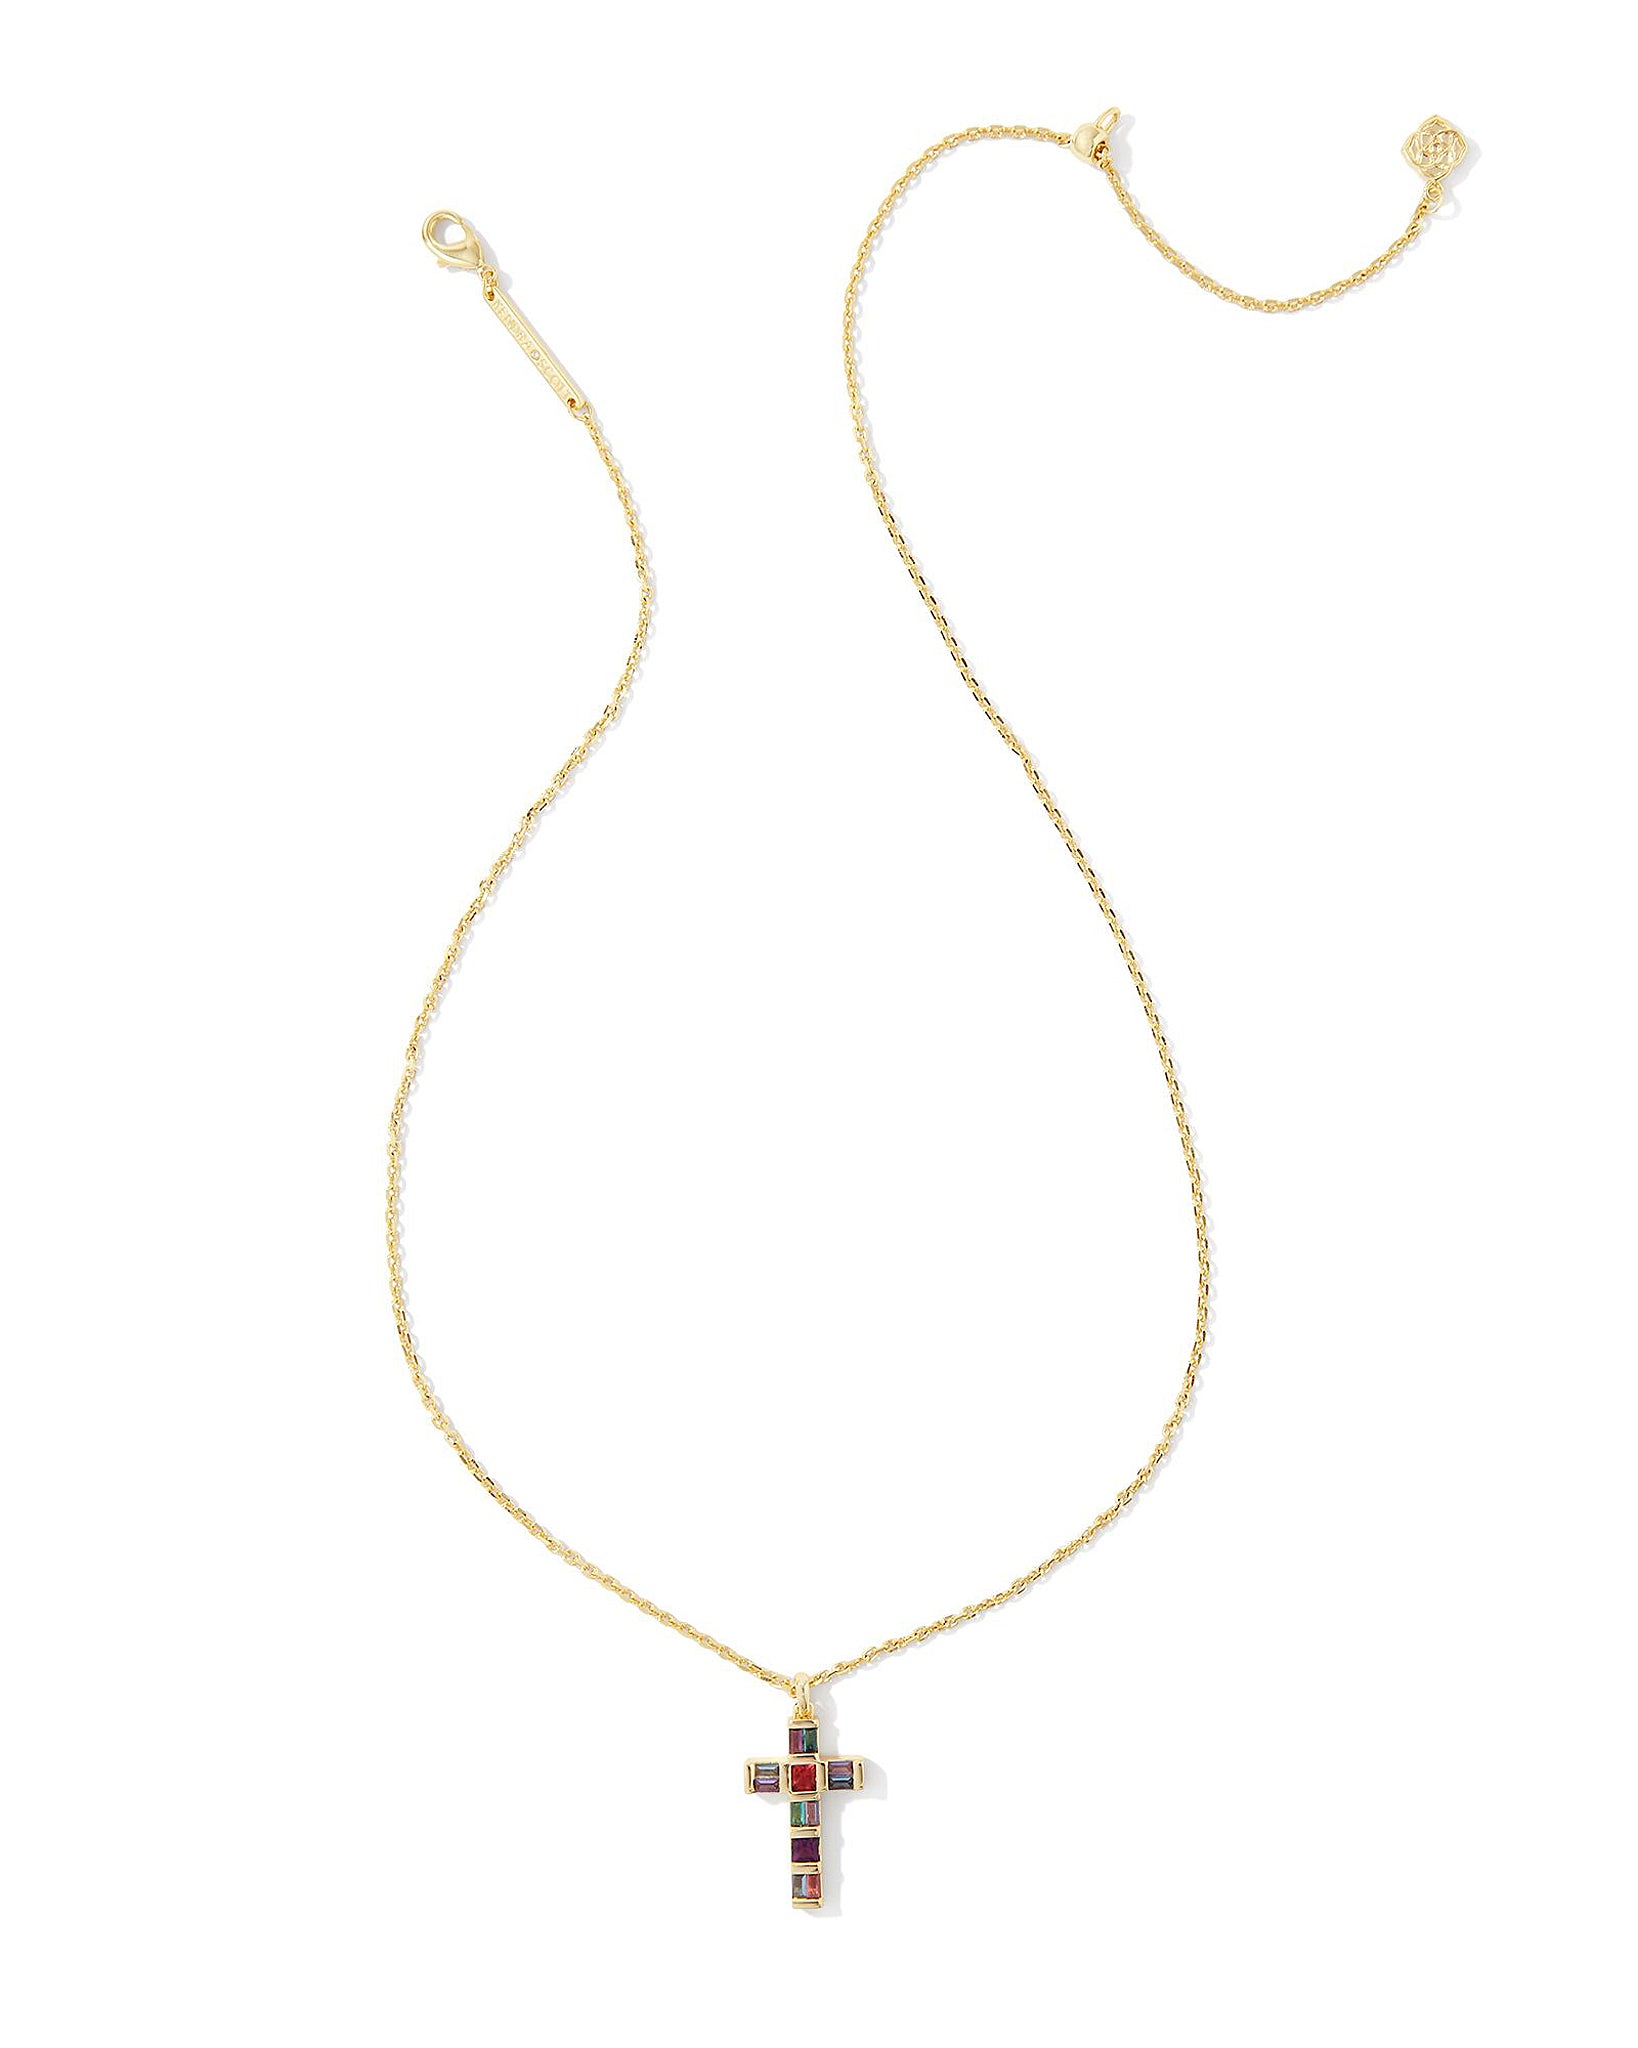 Kendra Scott Gracie Cross Pendant Necklace in Multi Mix and Gold